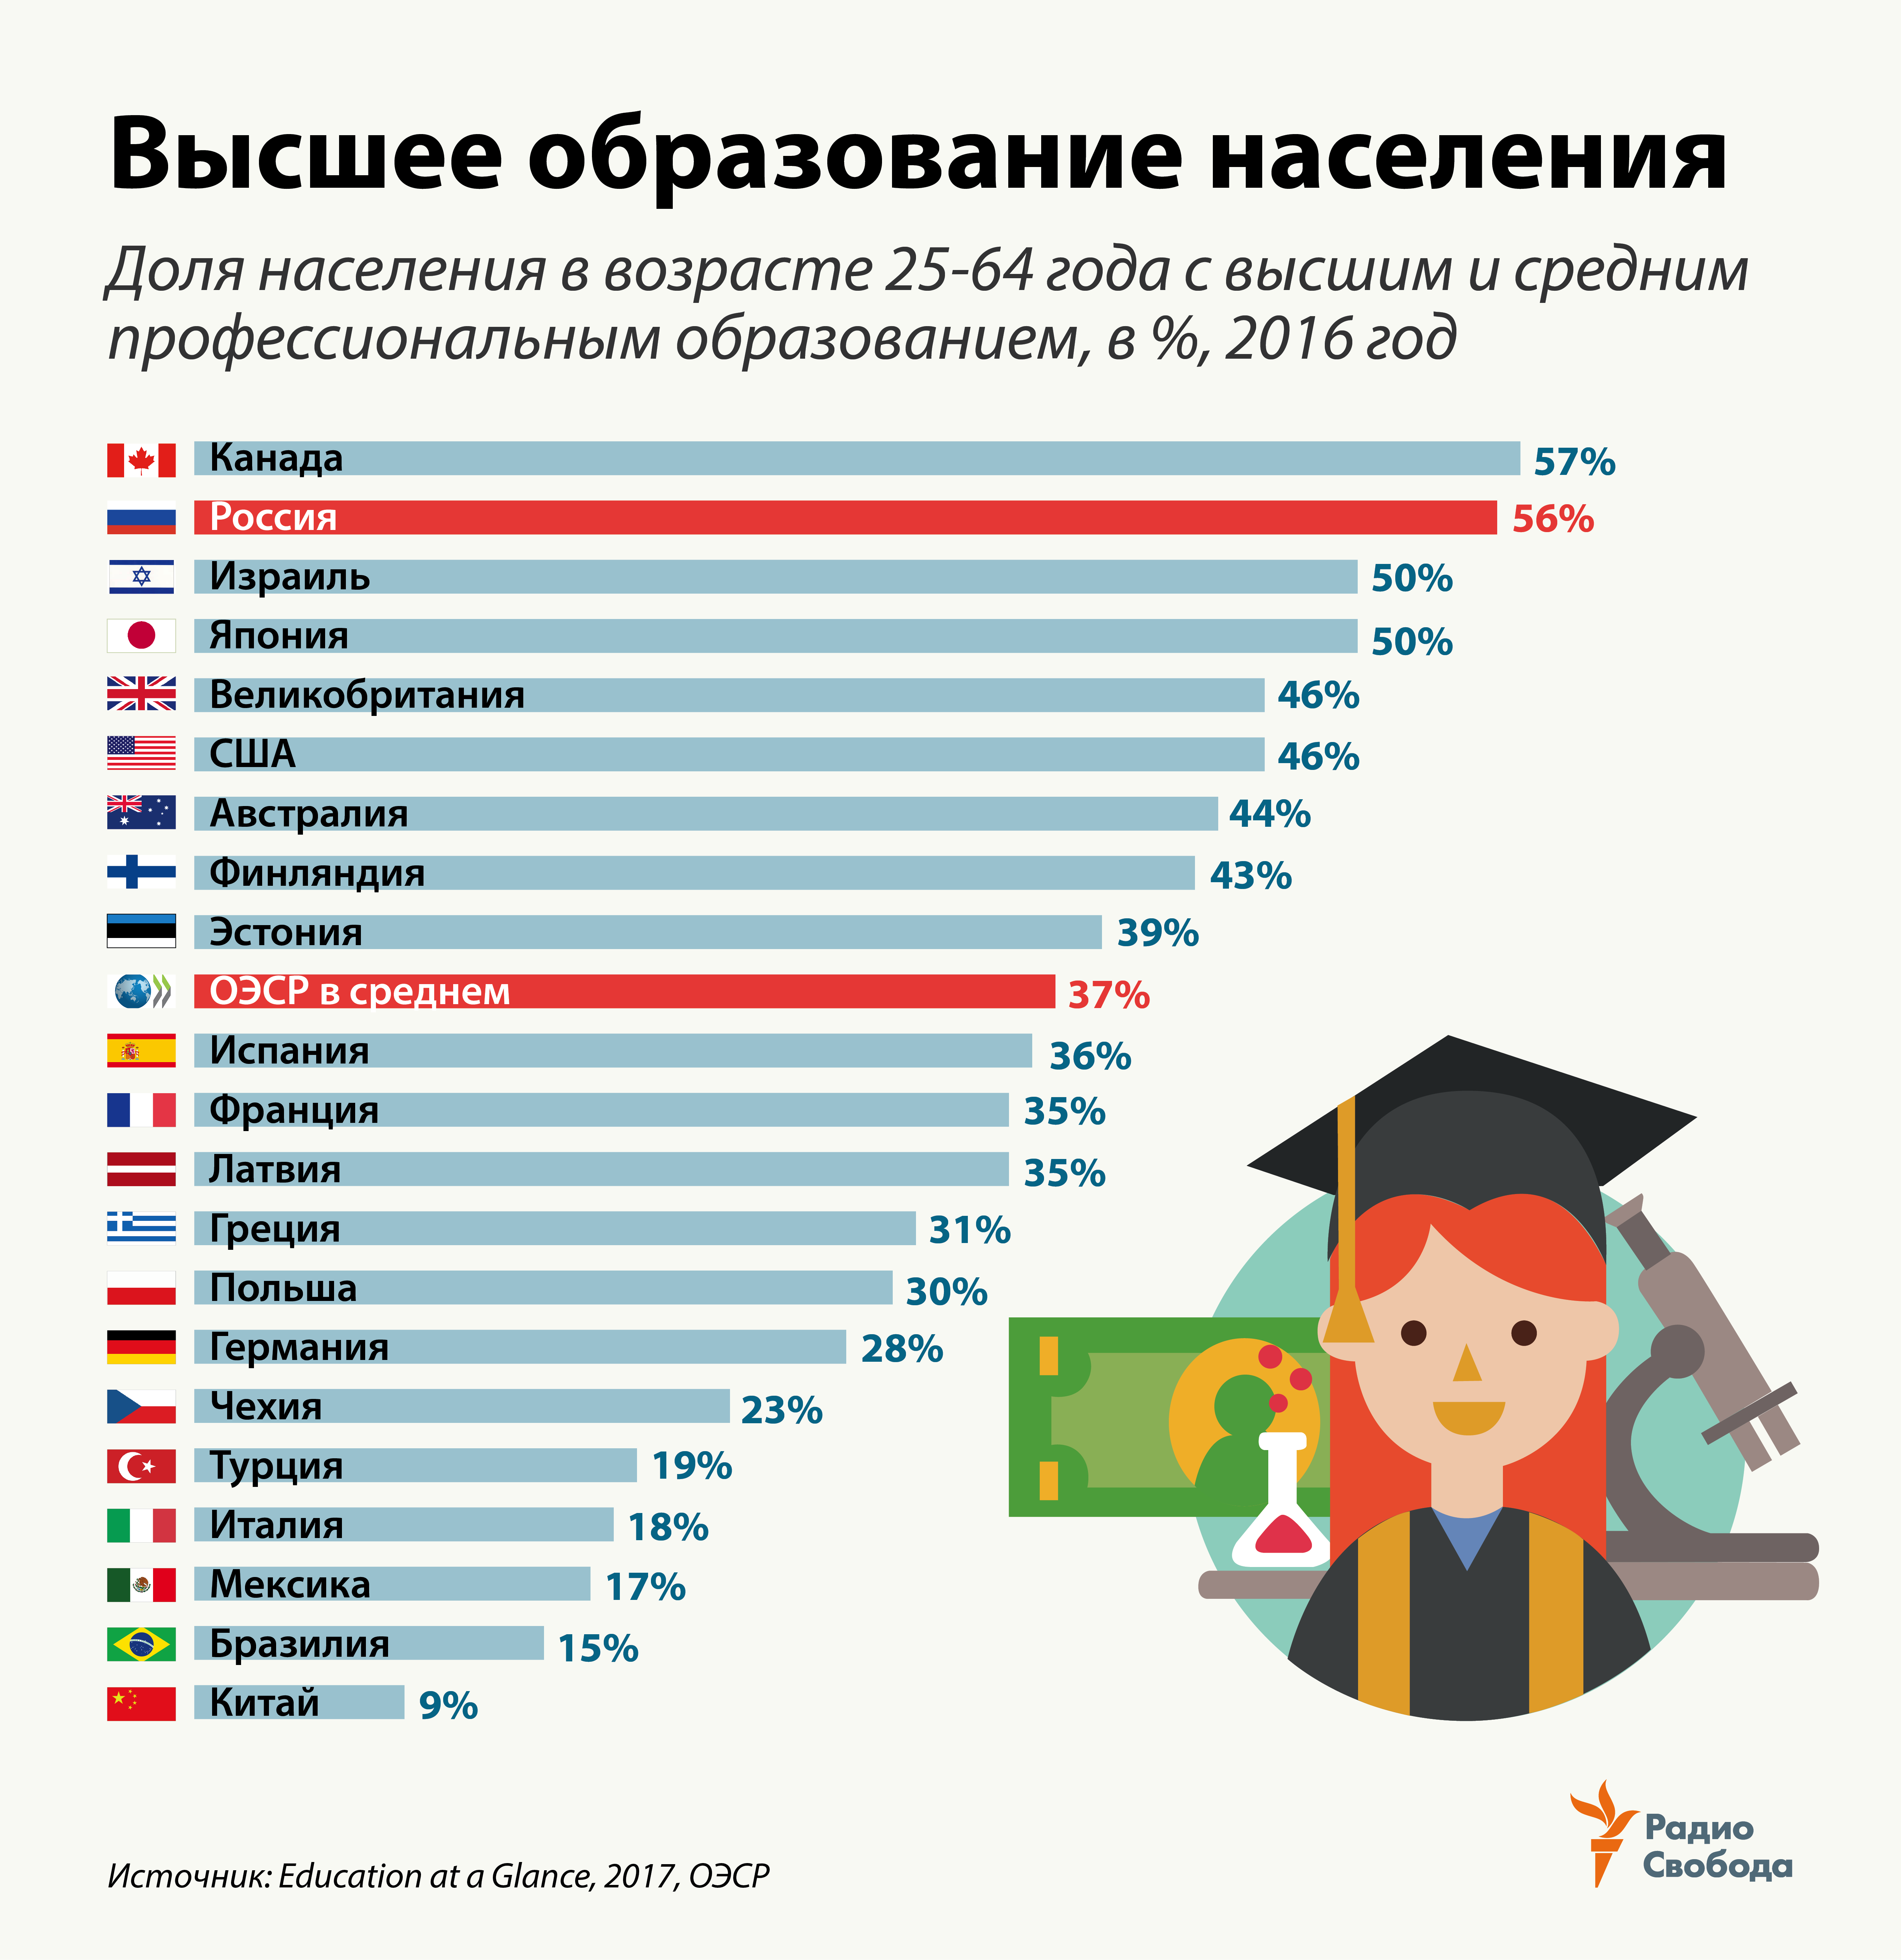 Russia-Factograph-Tertiary Education-Russia-OECD-25-64